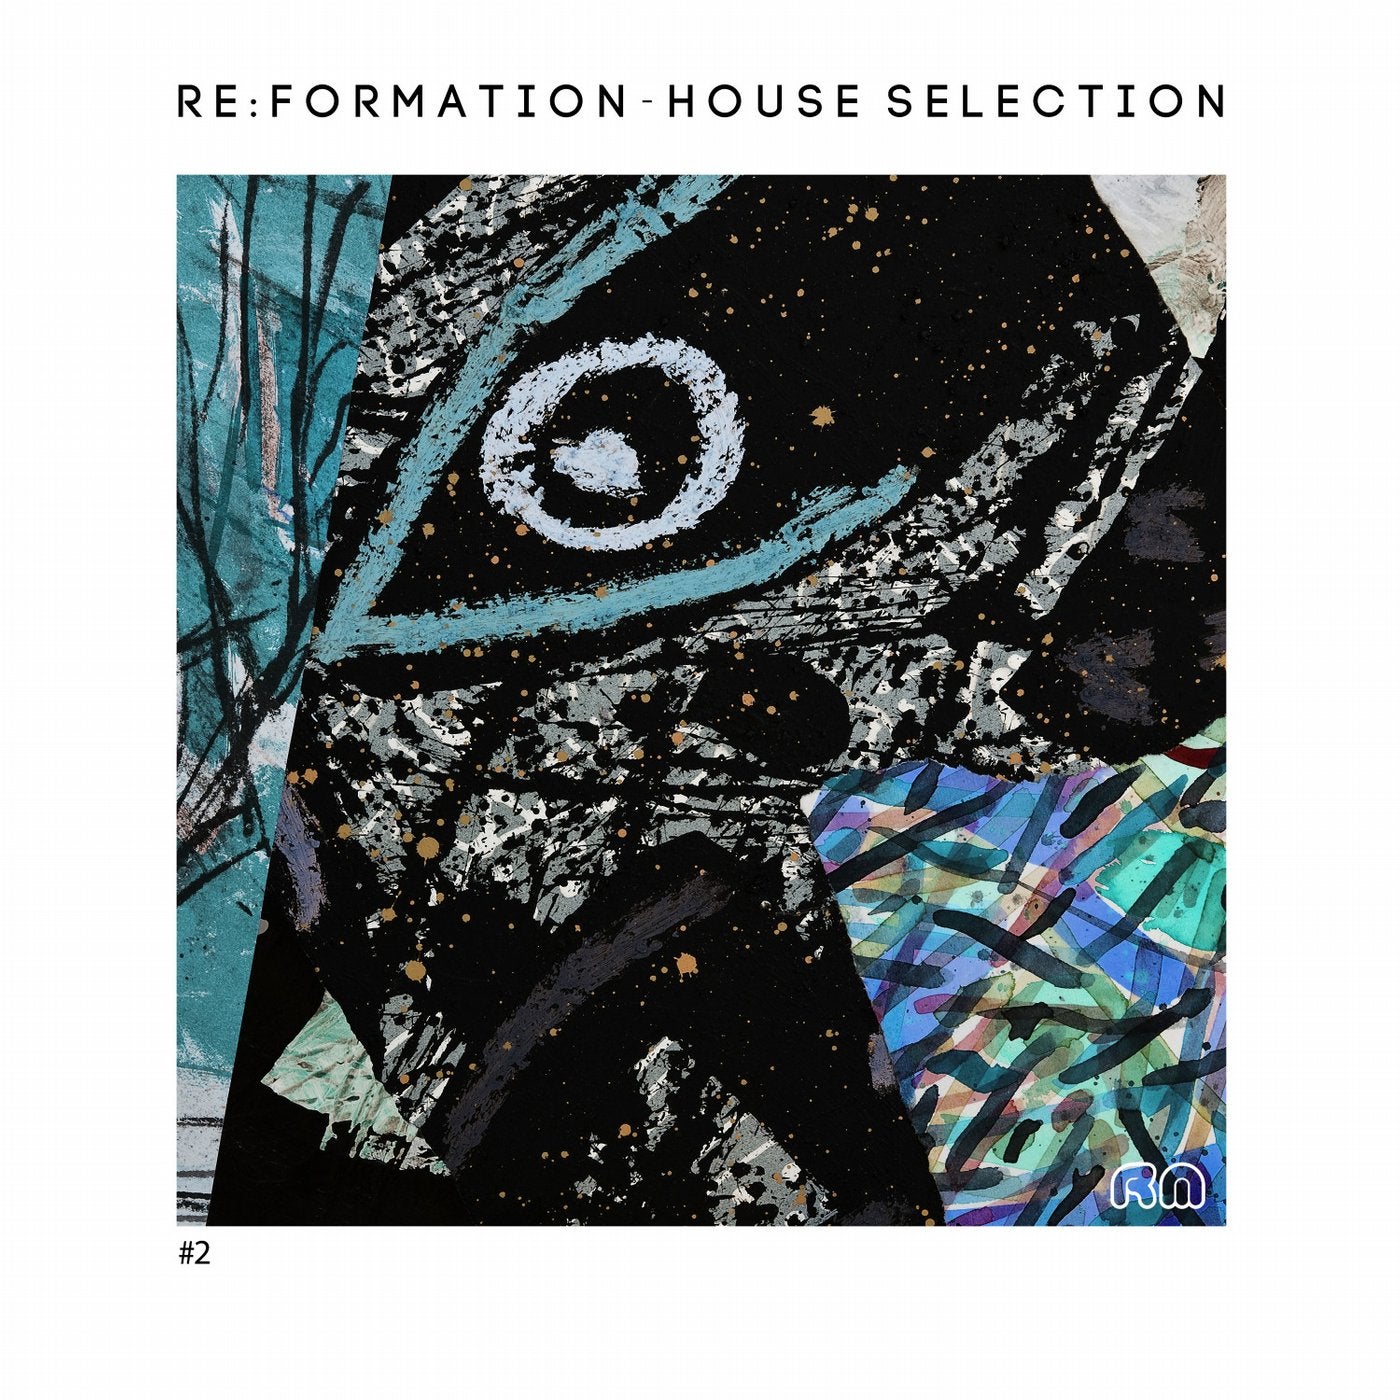 Re:Formation - House Selection #2